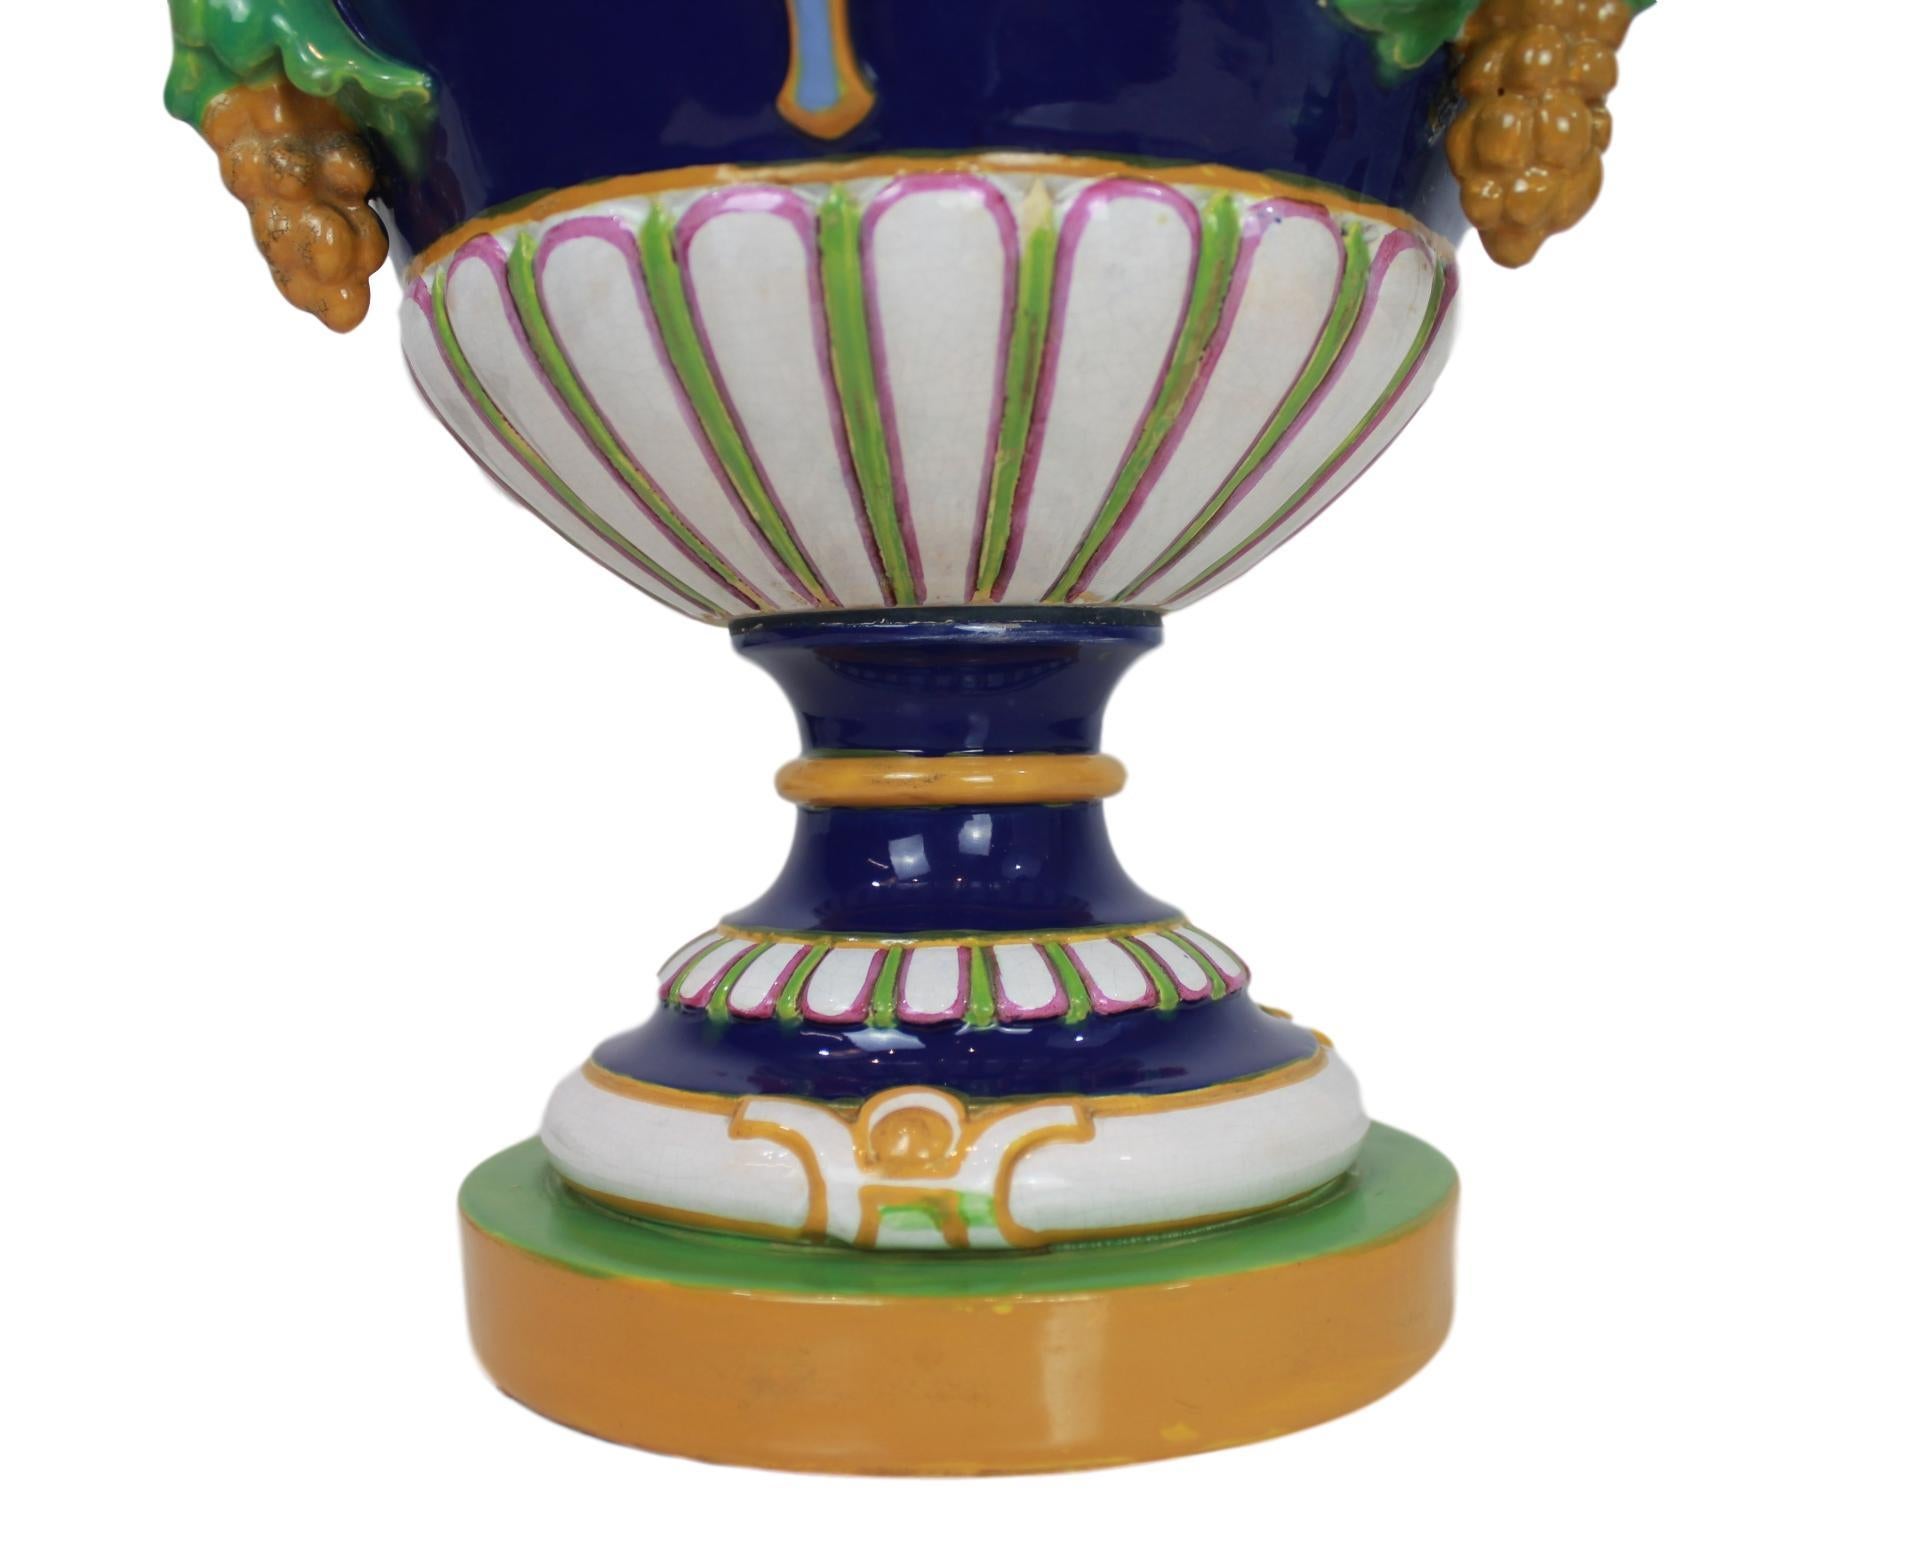 19th Century Minton Majolica 'Bacchus' Vase Cobalt Blue-Ground, English, Dated 1856 For Sale